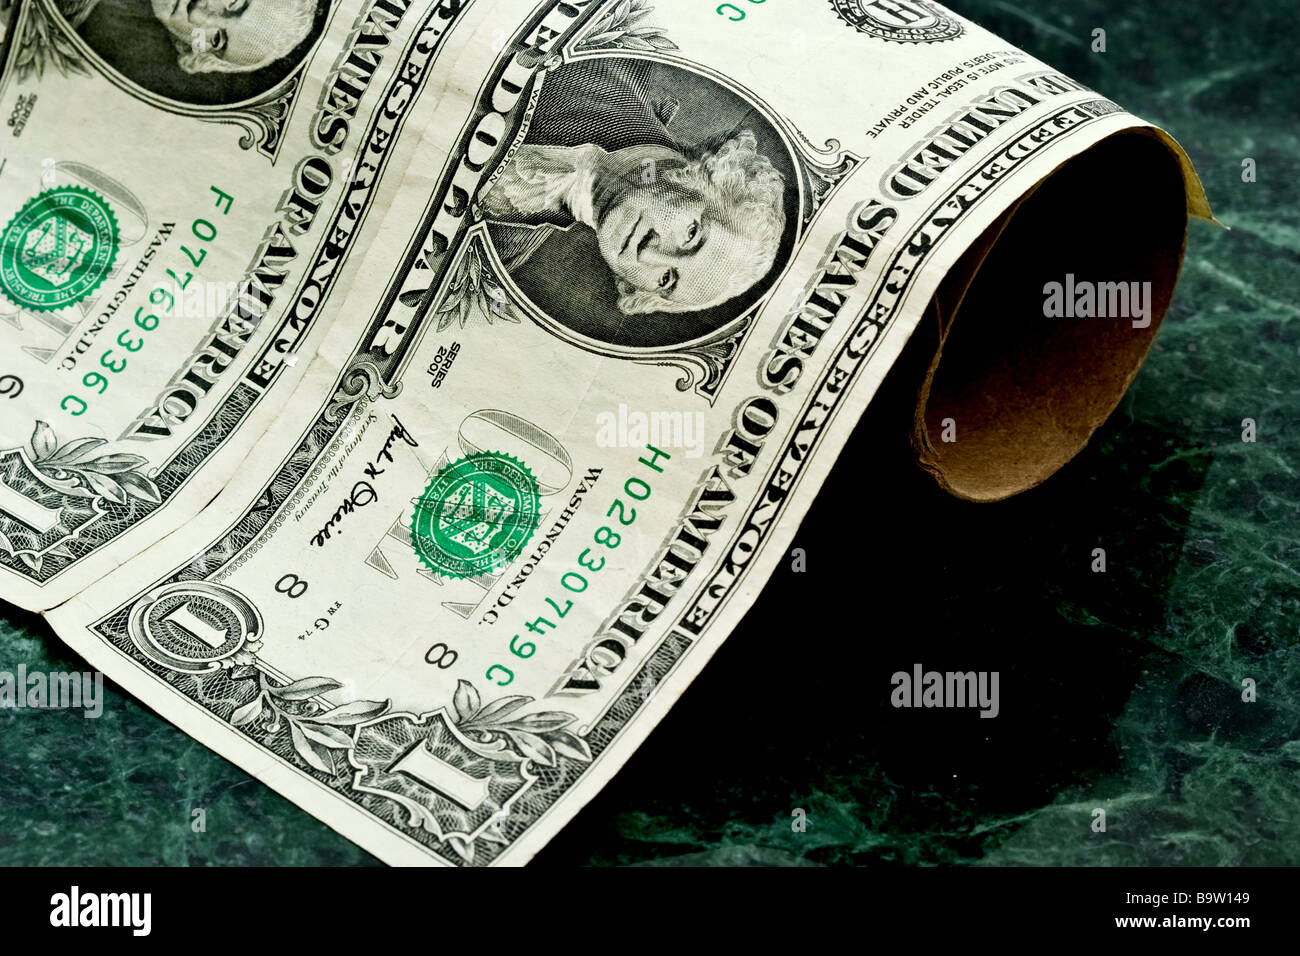 Two American one dollar bills on a cardboard toilet paper roll Stock Photo